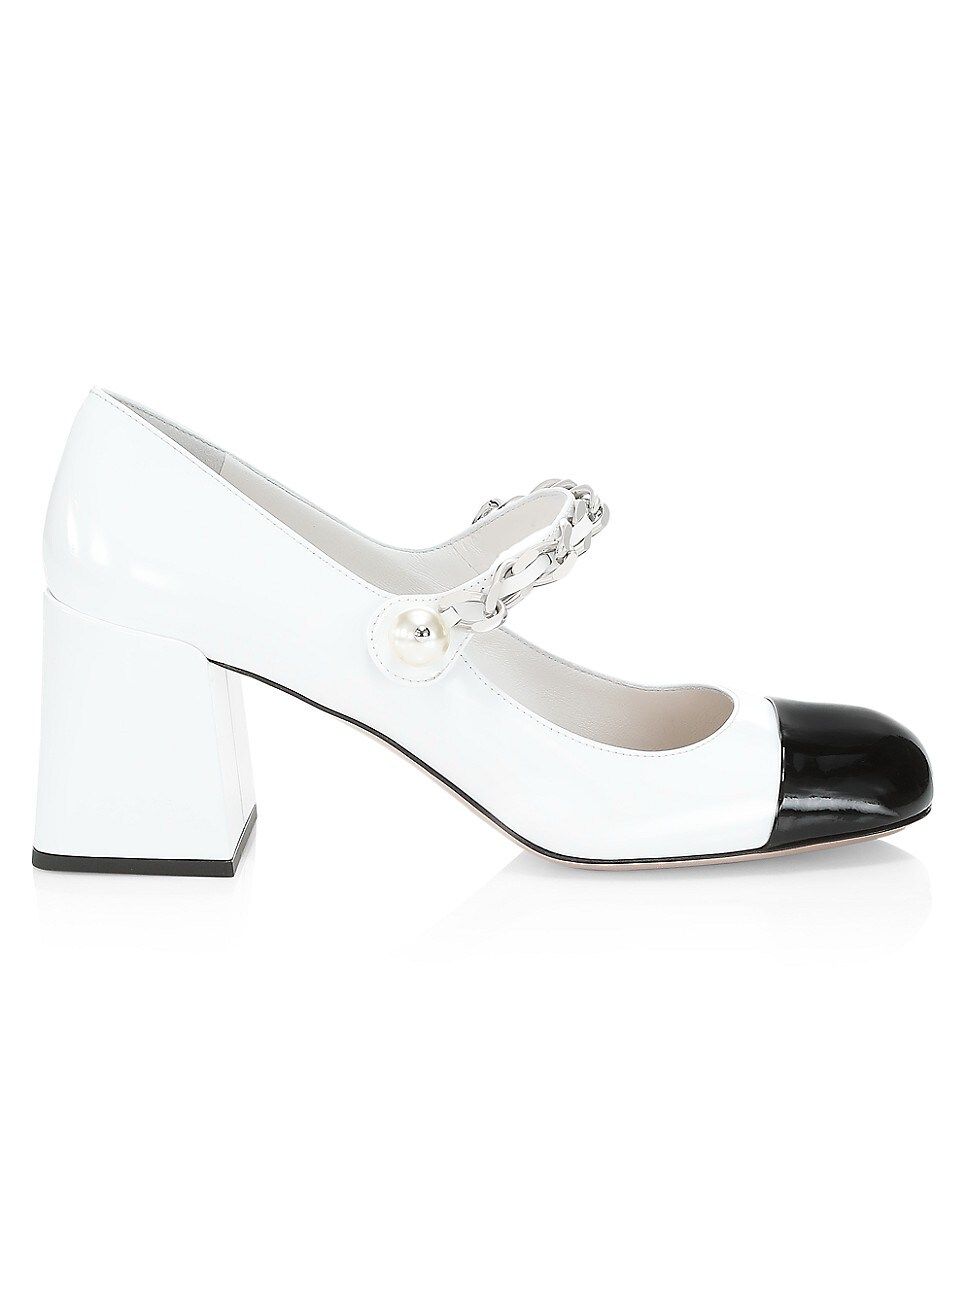 Patent Leather Square-Toe Mary Jane Pumps | Saks Fifth Avenue